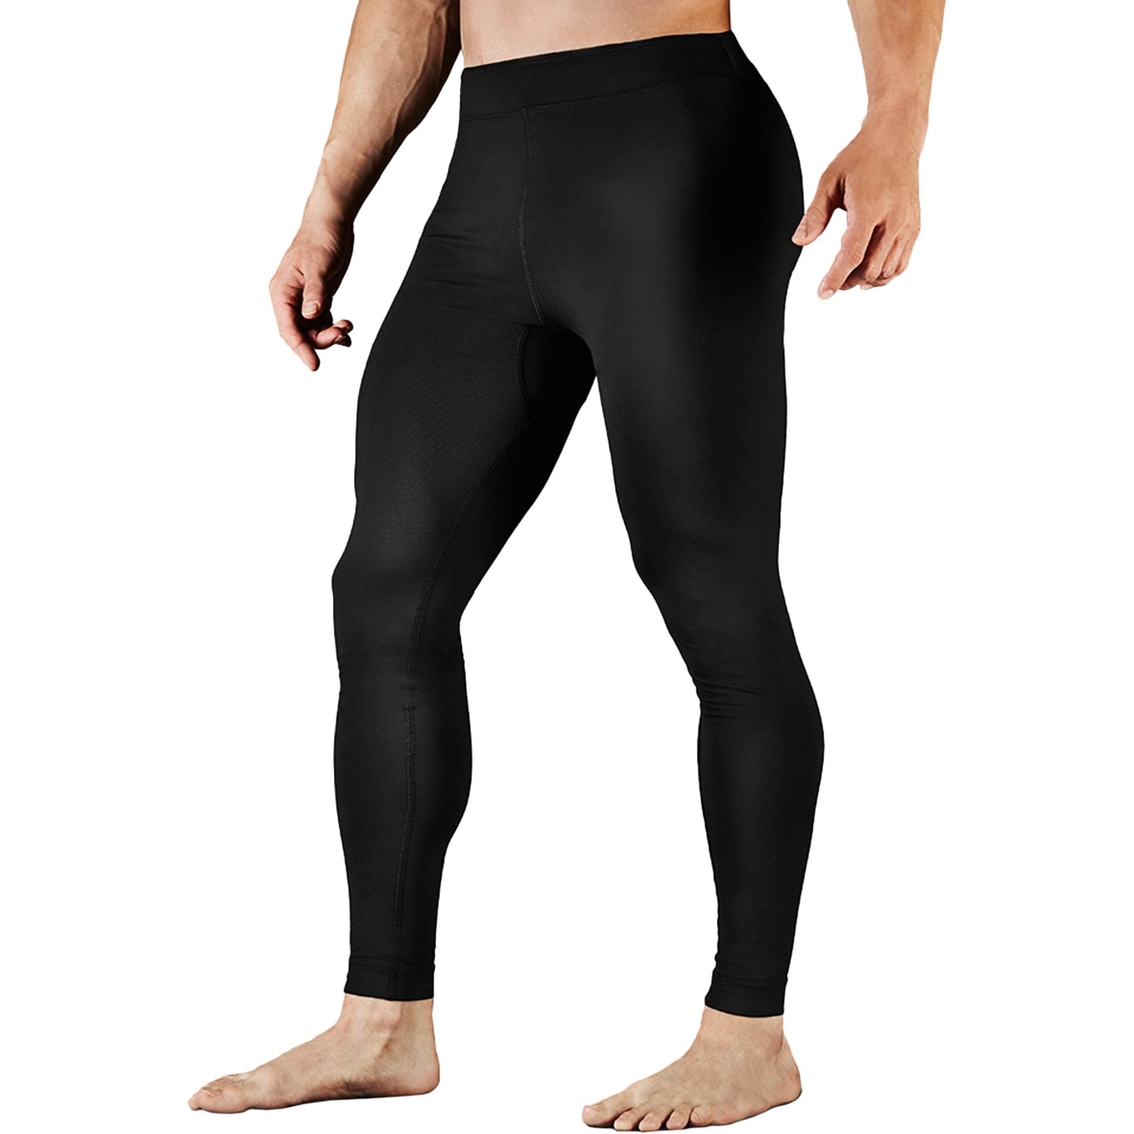 Tommie Copper Running Tights | Pants | Clothing & Accessories | Shop ...